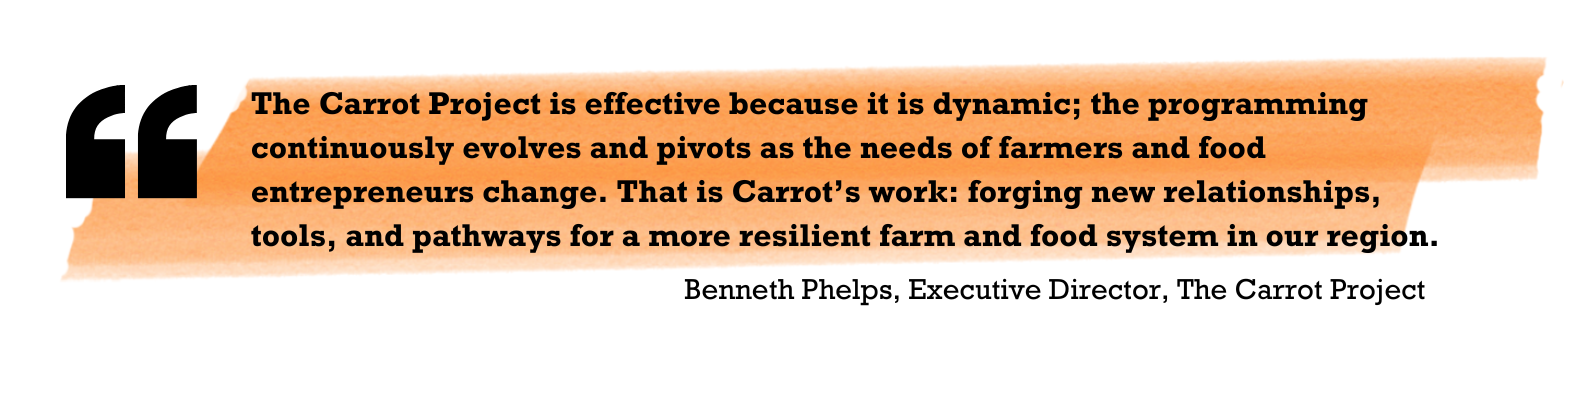 "The Carrot Project is effective because it is dynamic; the programming continuously evolves and pivots as the needs of farmers and food entrepreneurs change. That is Carrot’s work: forging new relationships, tools, and pathways for a more resilient farm and food system in our region." Benneth Phelps, Executive Director, The Carrot Project 